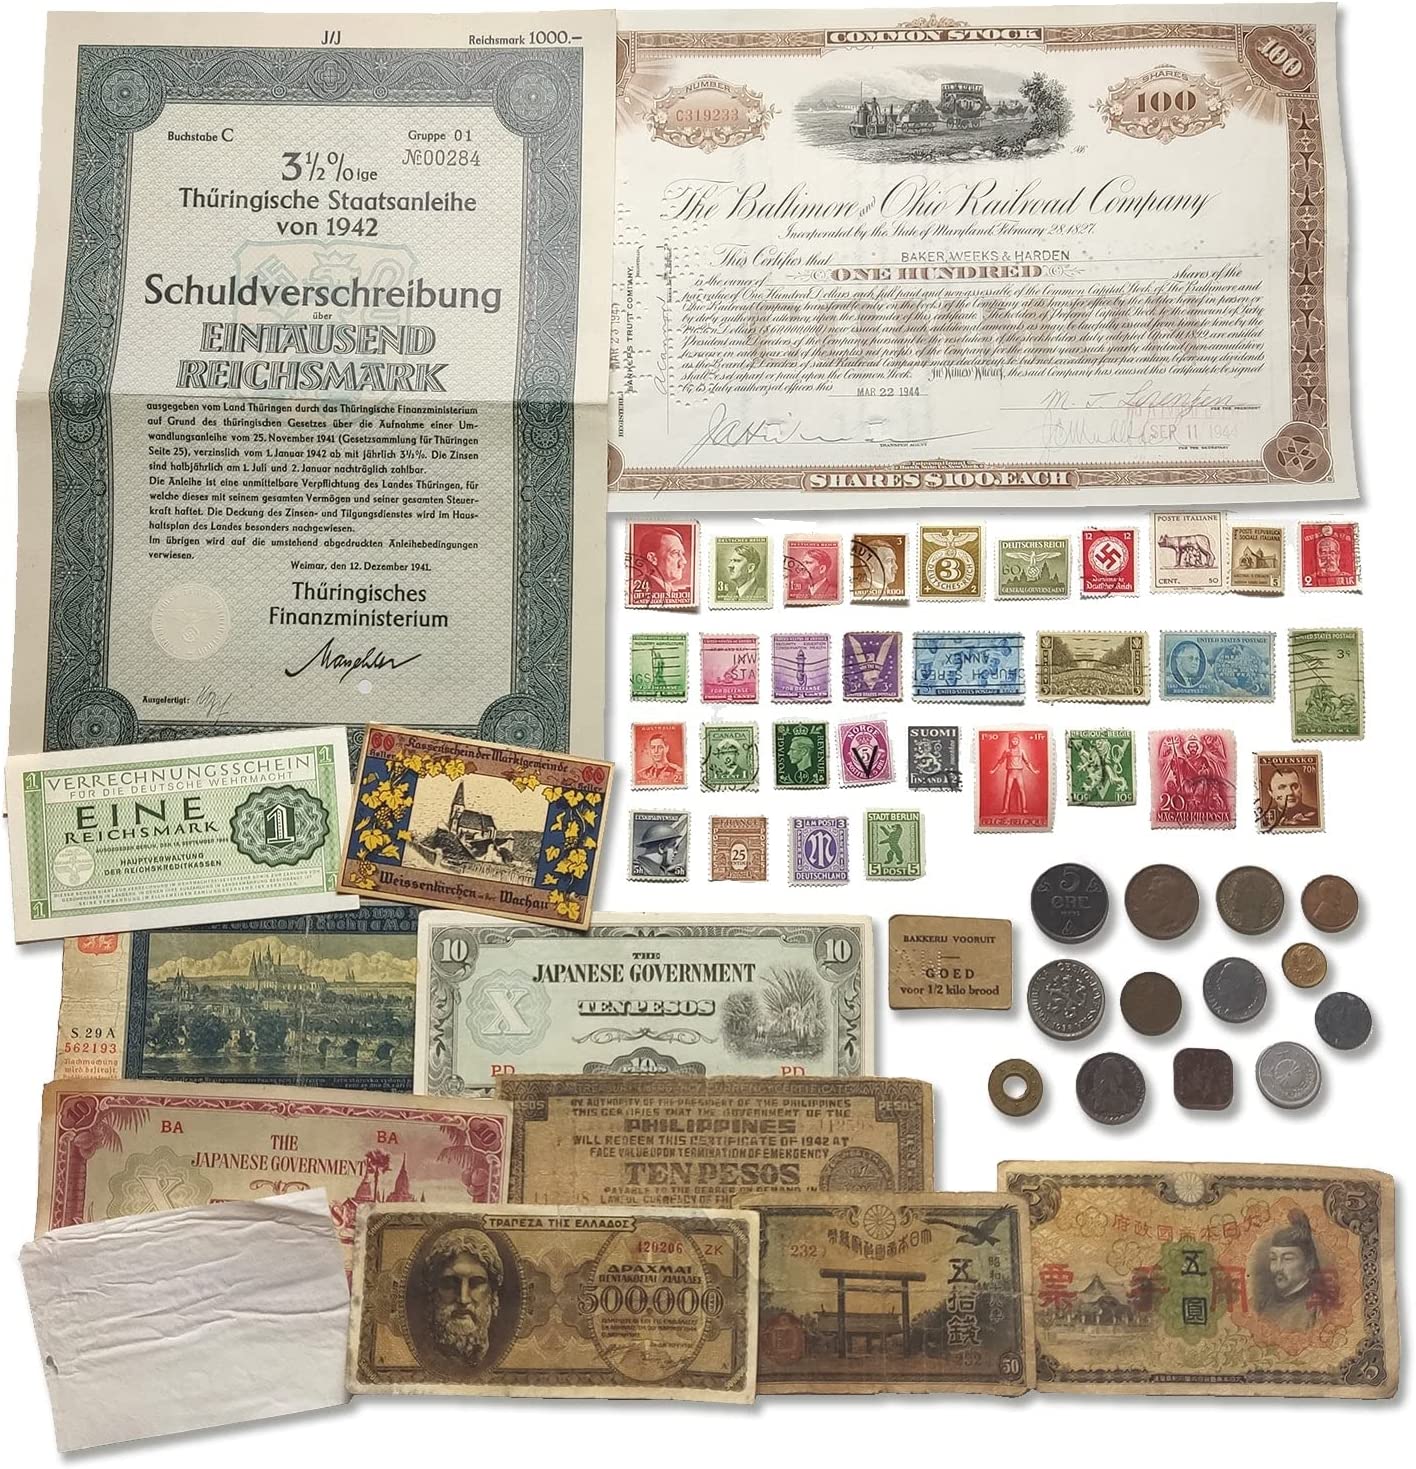 WW2 World Currency – 57 Original Allied & Axis Powers Banknotes, Coins, Stamps and Bonds + Album to Build Your Foreign Currency Collection - Coin Collection Supplies and Certificate of Authenticity